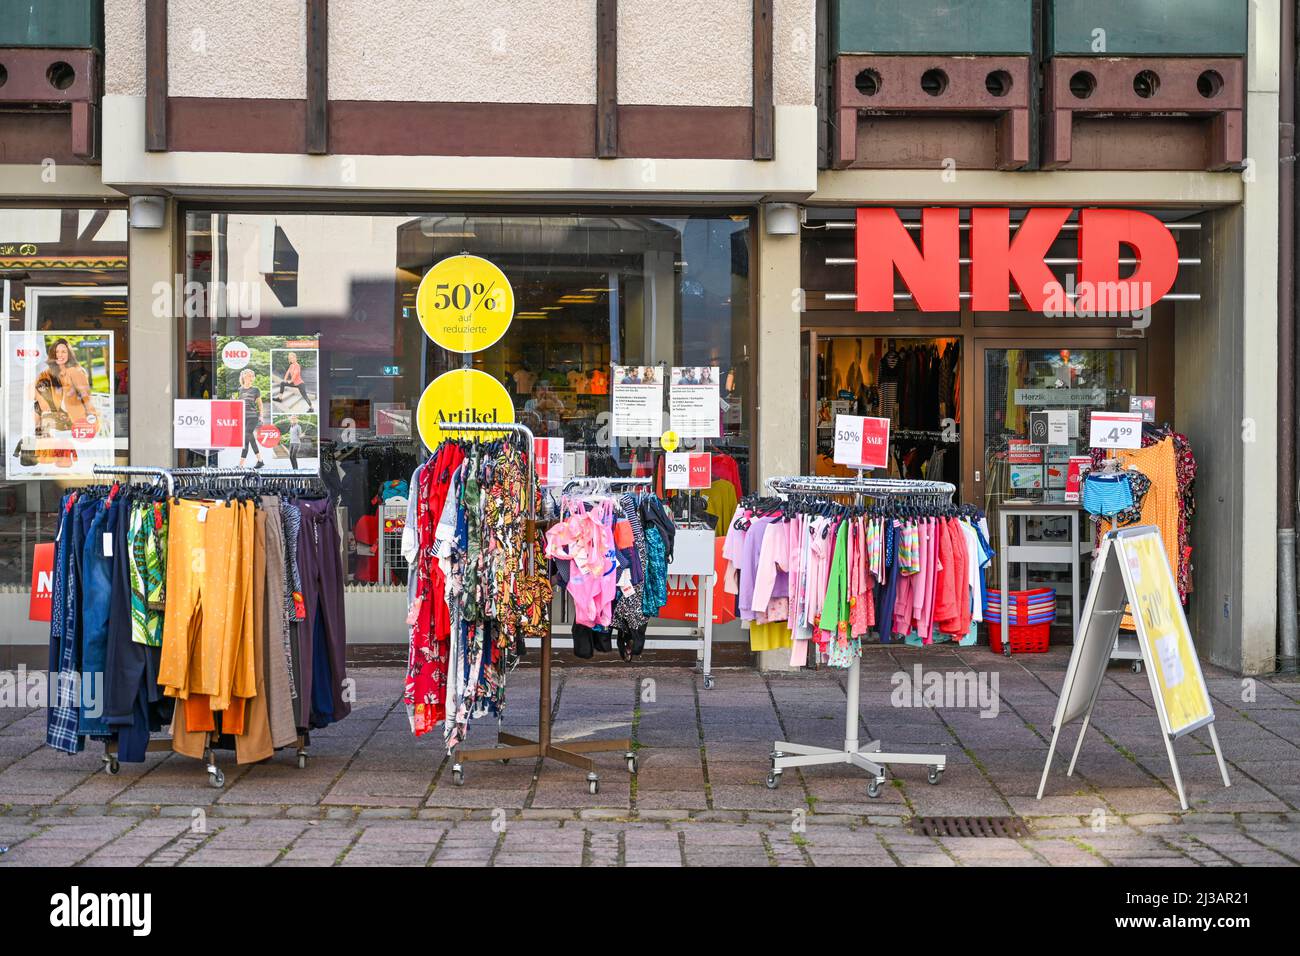 NKD textiles, Muenchhausenstrasse, Muenchhausenstadt Bodenwerder,  Basse-Saxe, Allemagne Photo Stock - Alamy